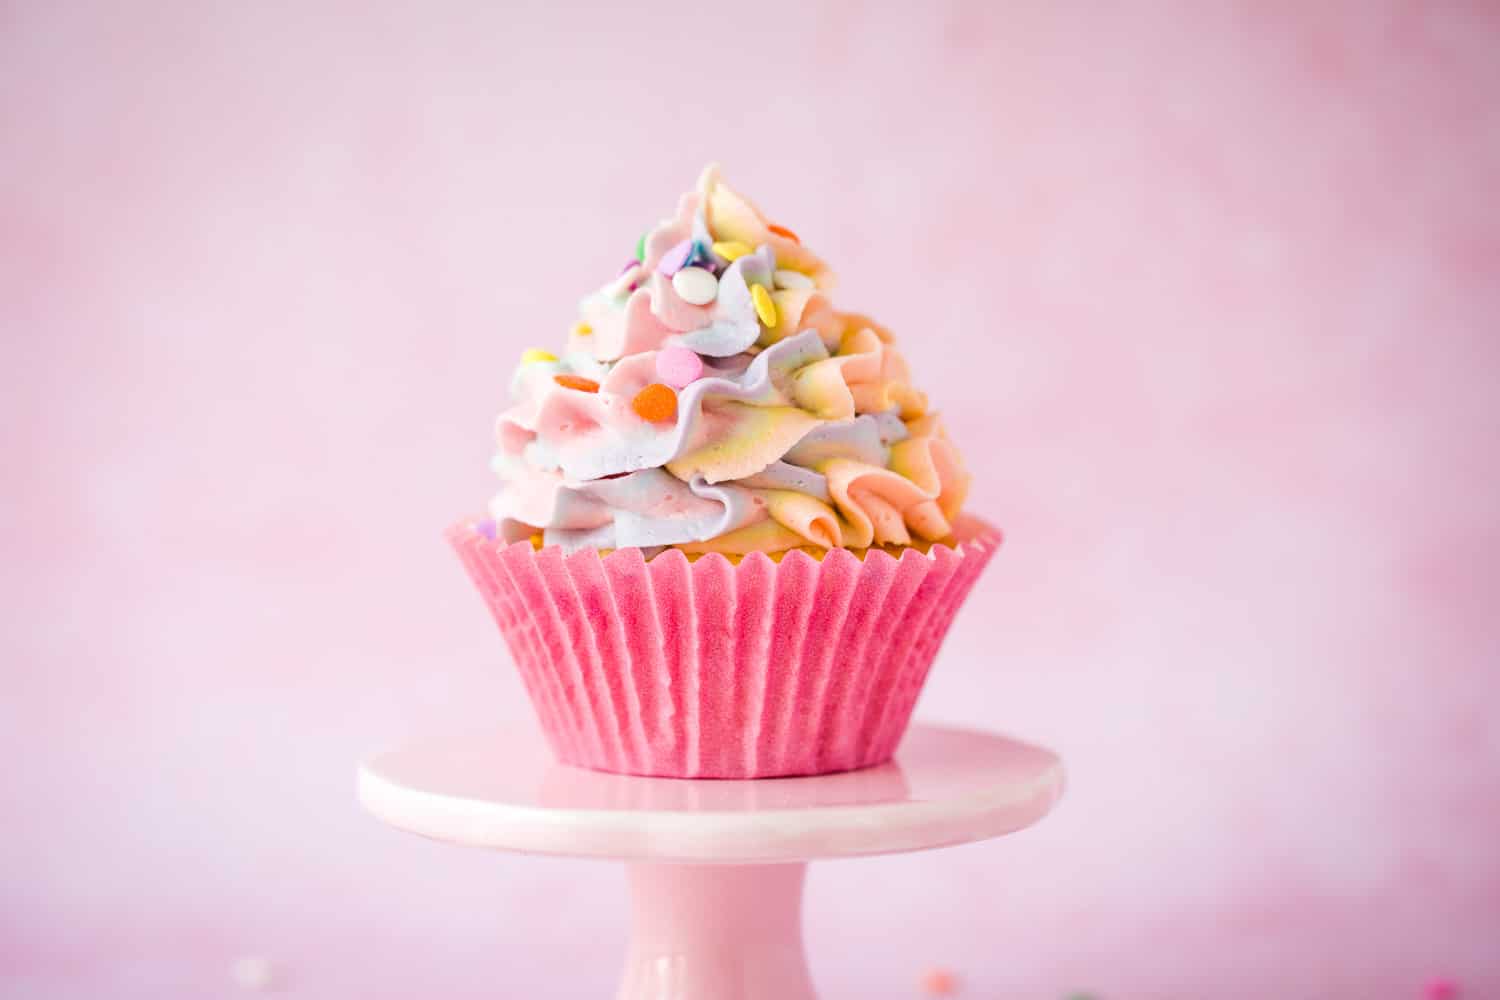 A piñata cupcake on a small pink cake stand with ruffle rainbow coloured icing